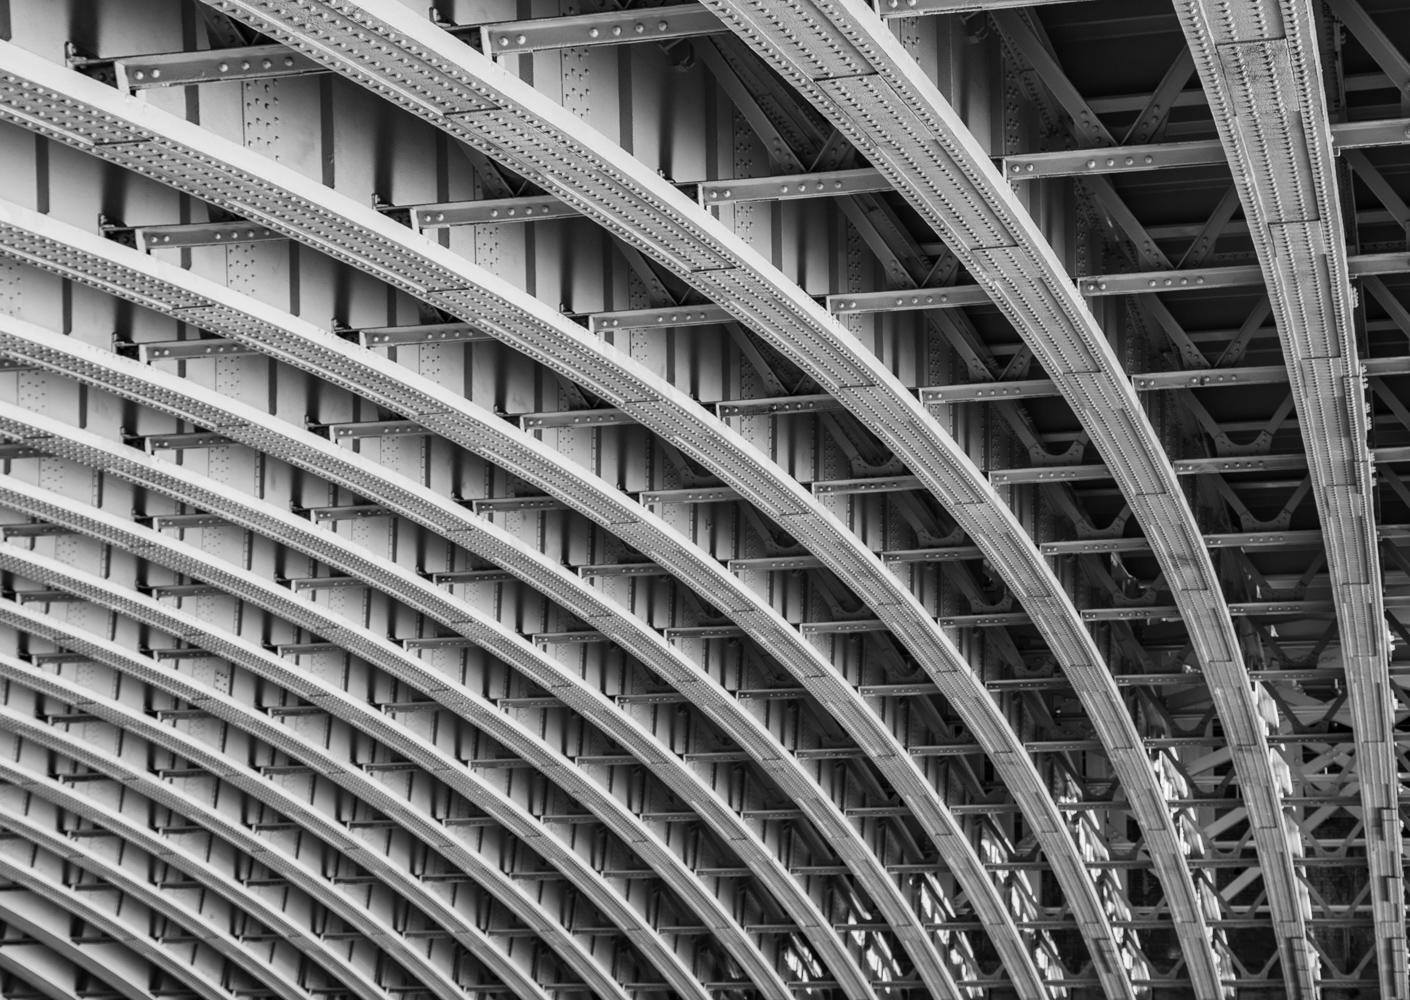 An image called Blackfriars Arches, which is a great representation of how lines and curves can be used in a black and white aesthetic